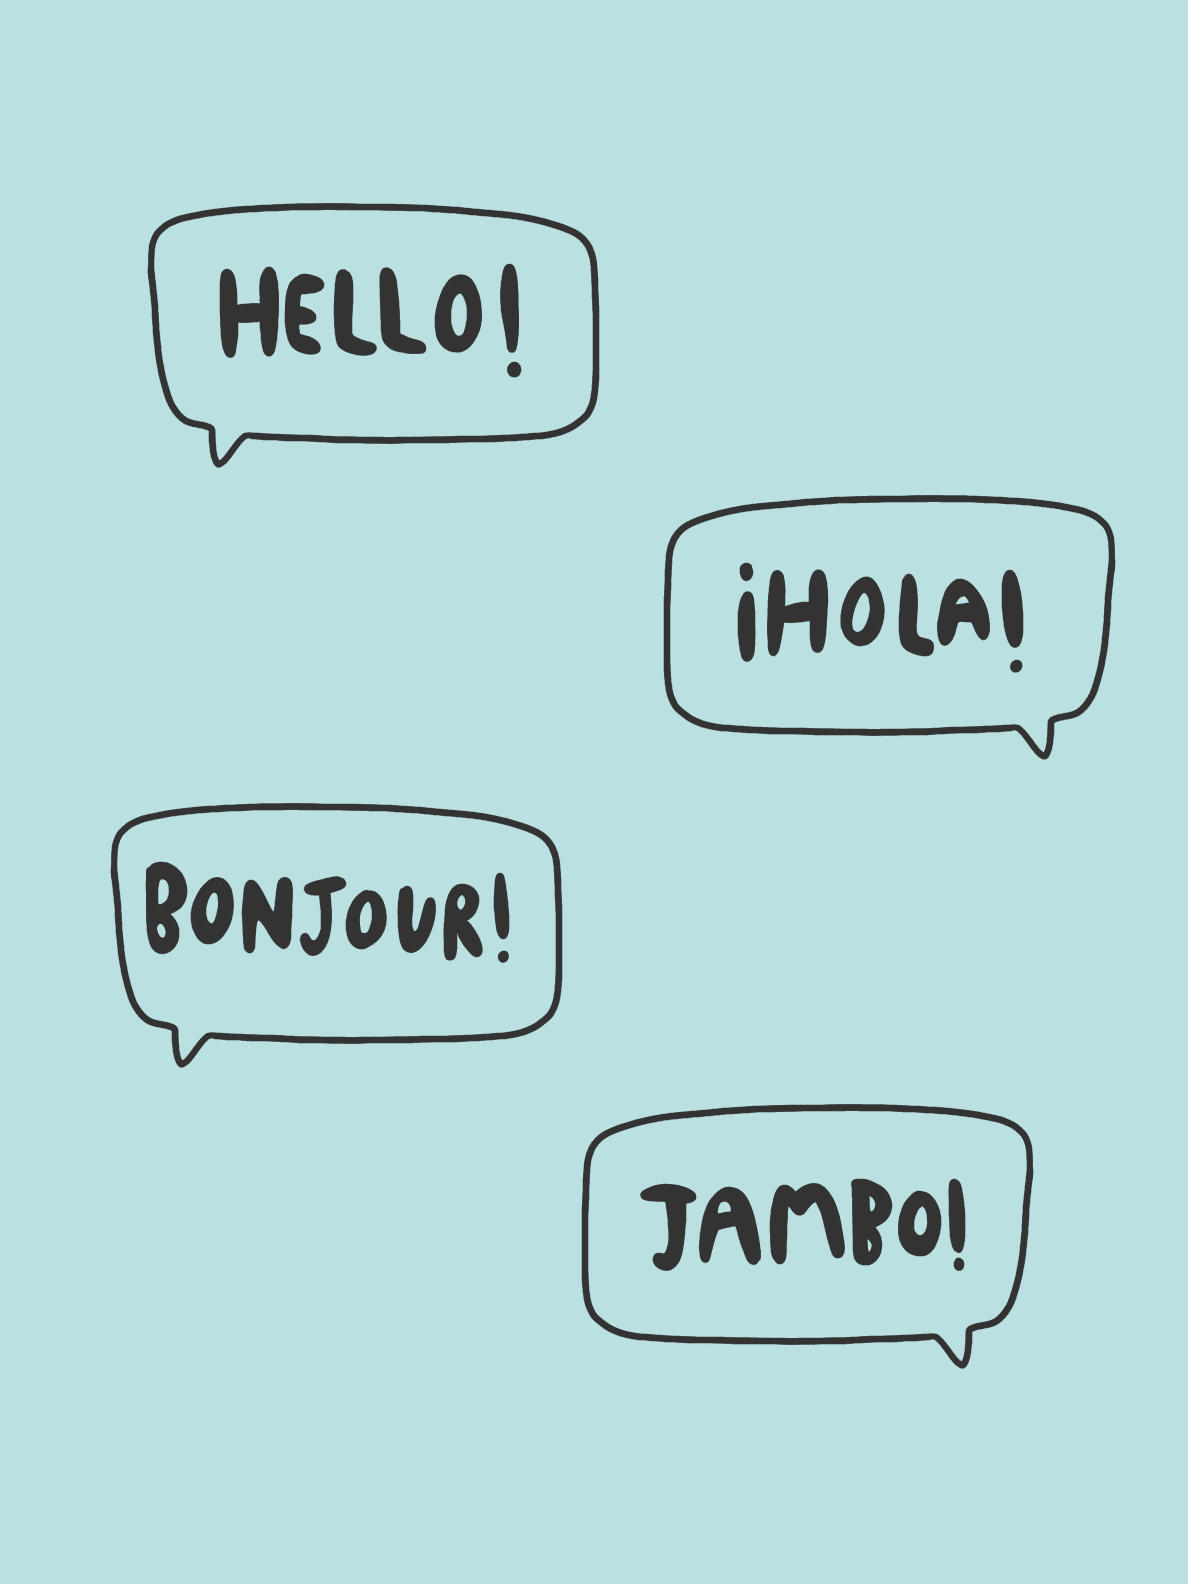 Hello in 4 languages